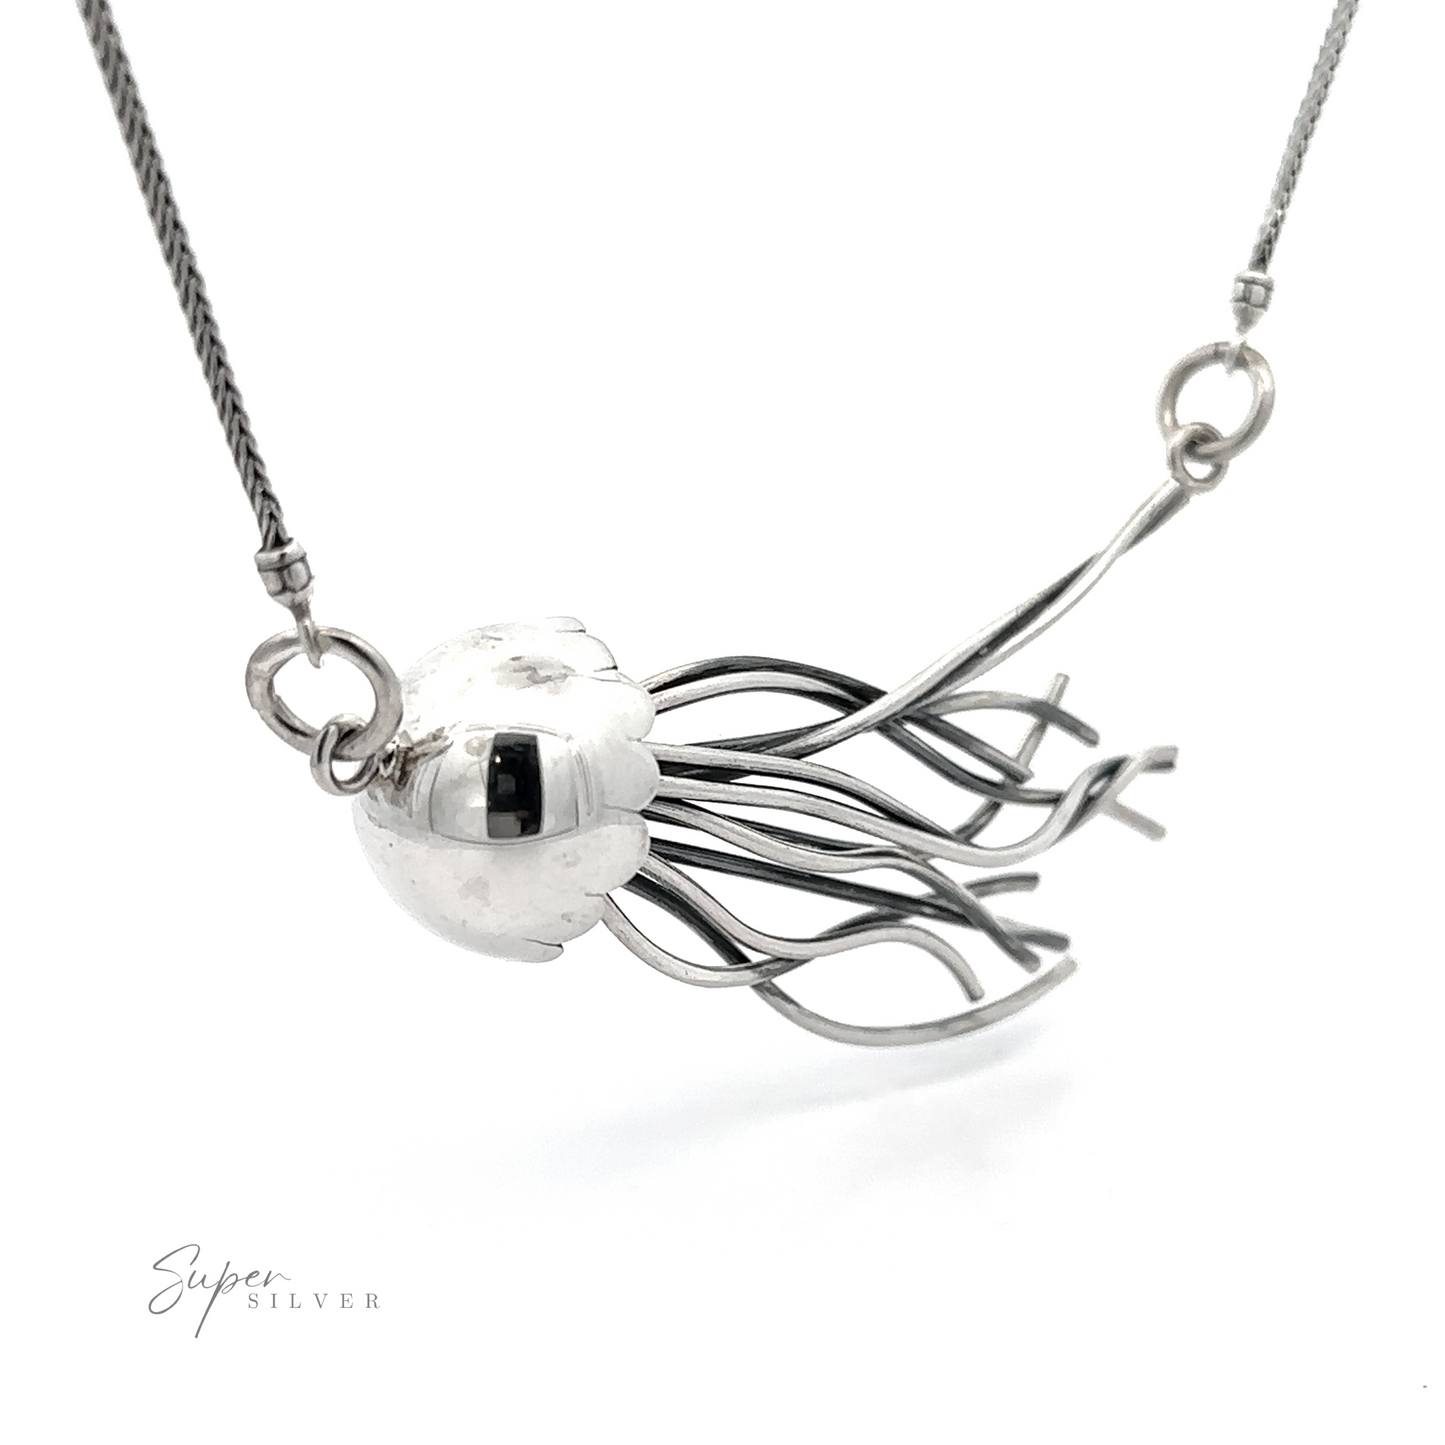 
                  
                    Jellyfish necklace featuring a spherical pendant encased in an abstract, branch-like sterling silver design, displayed against a white background with a signature "super silver.
                  
                